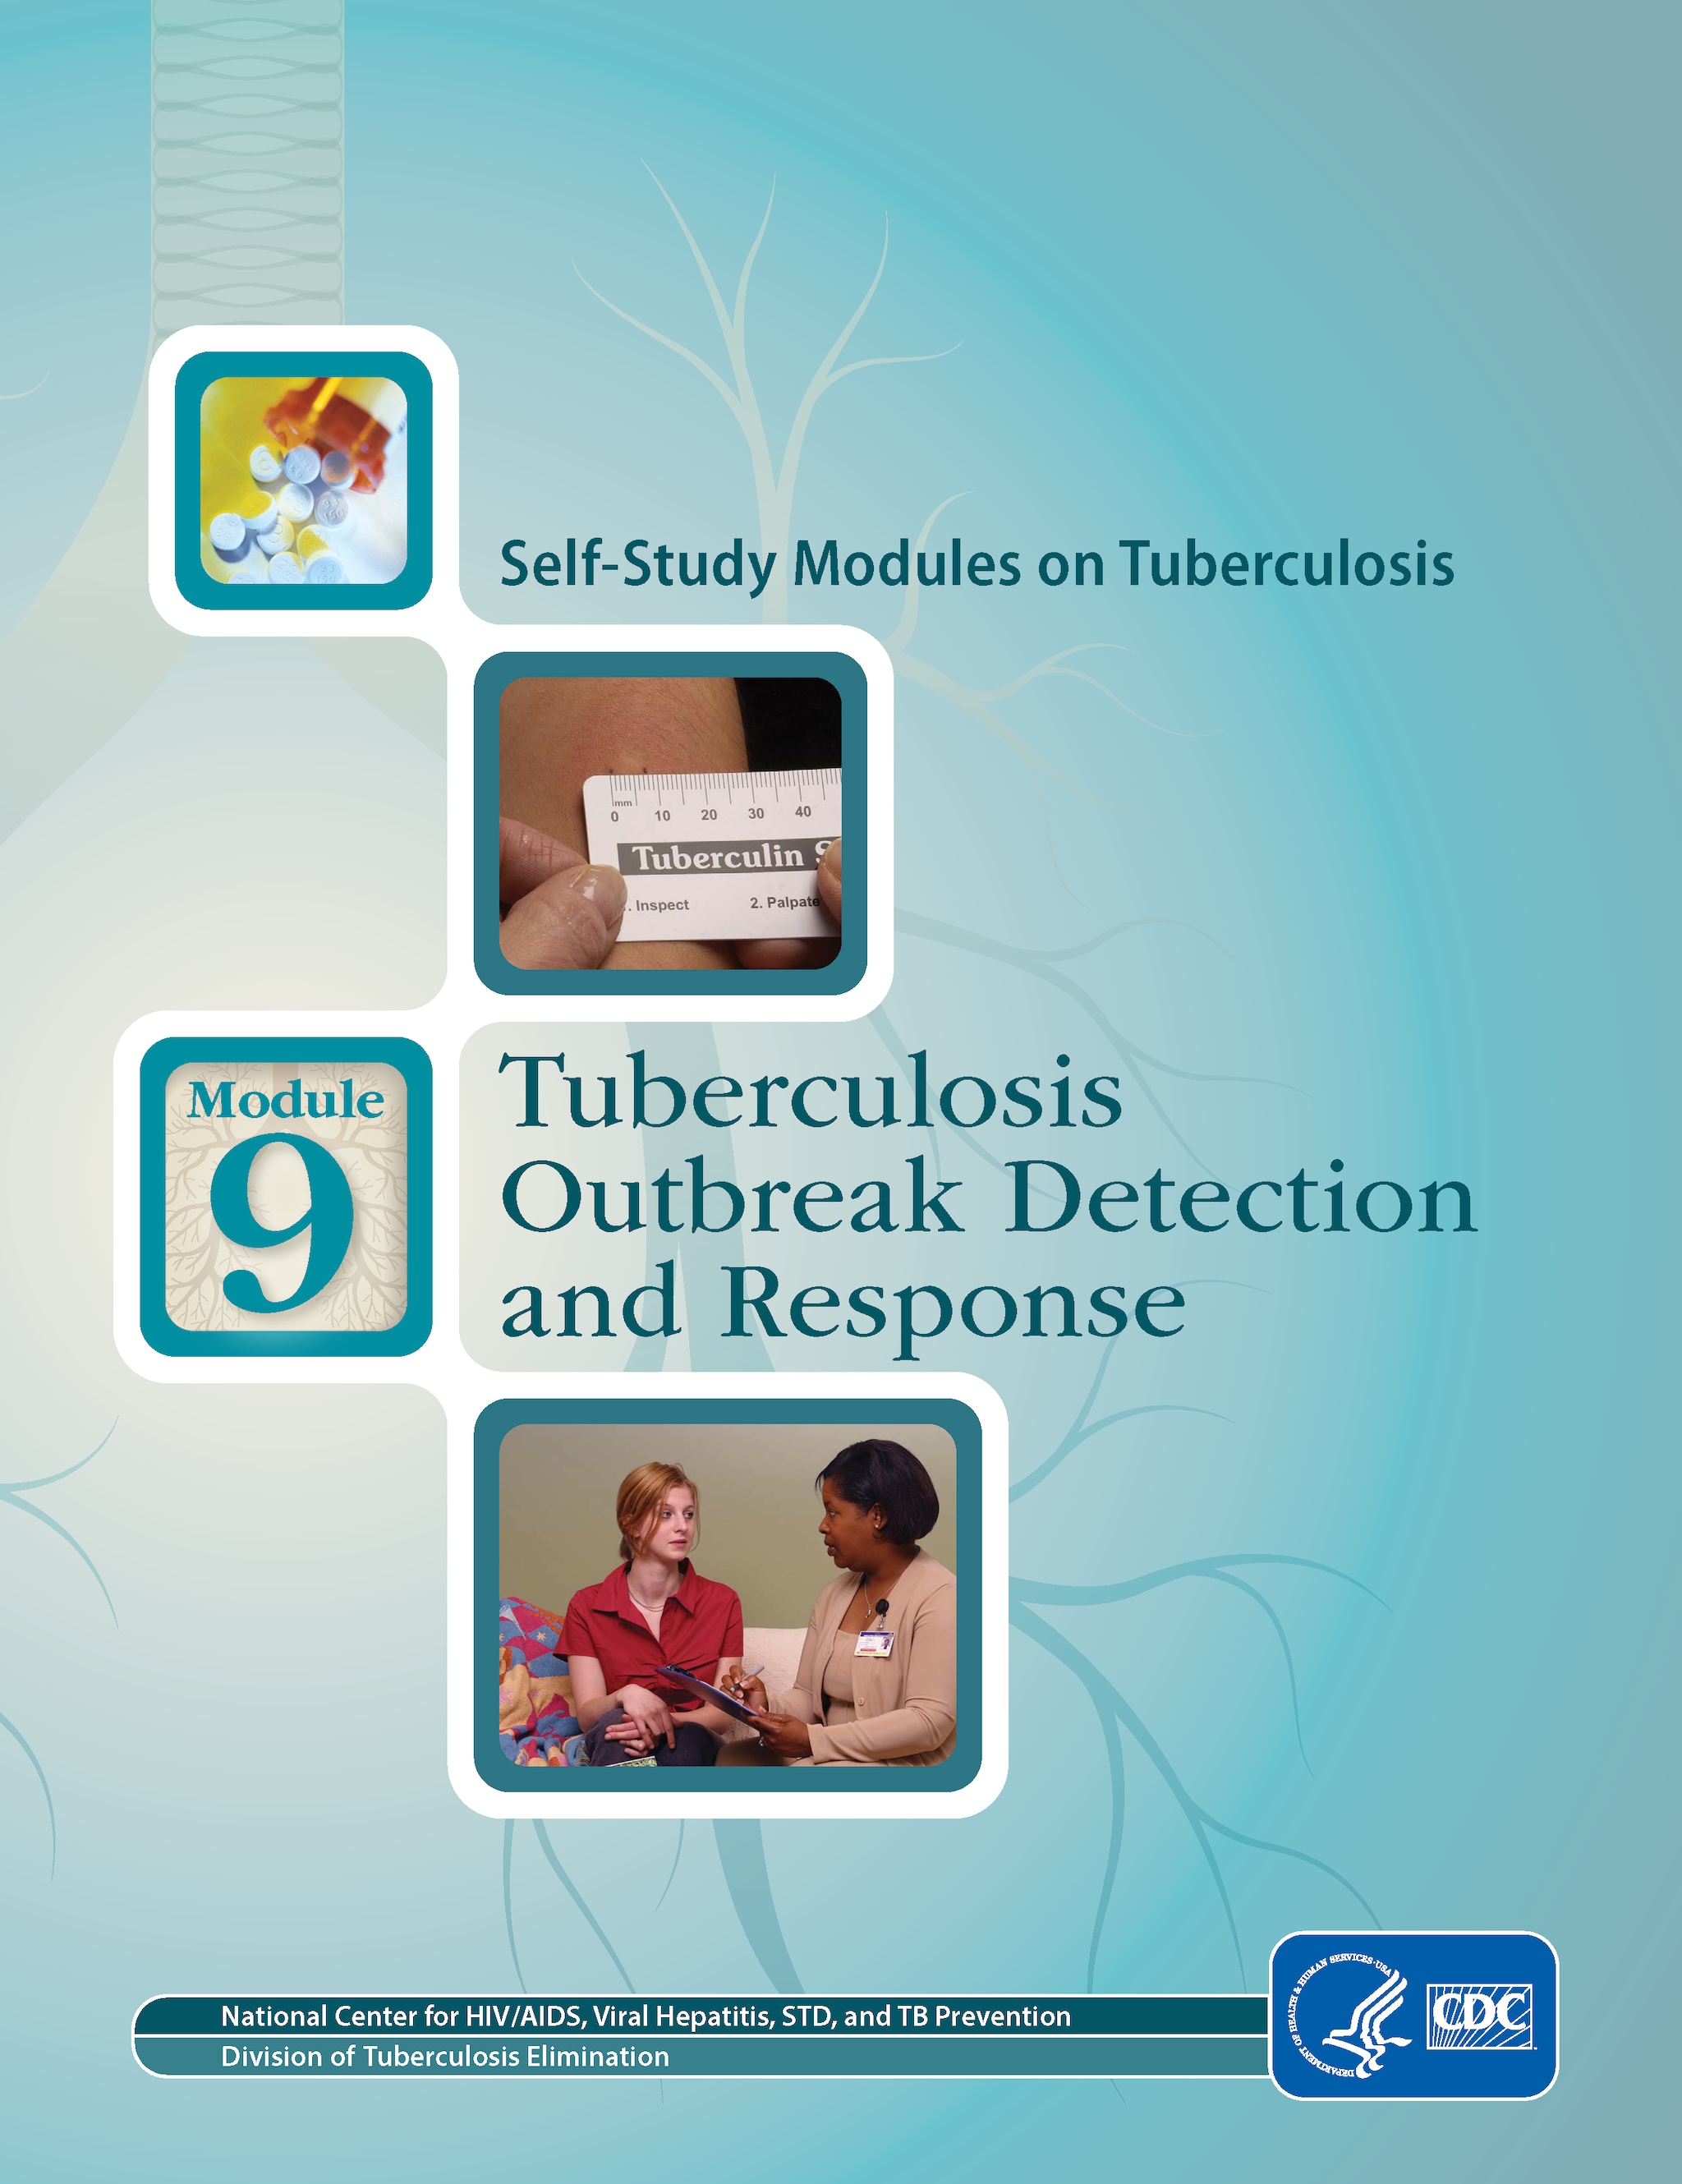 Self Study Module 9: Tuberculosis Outbreak Detection and Response